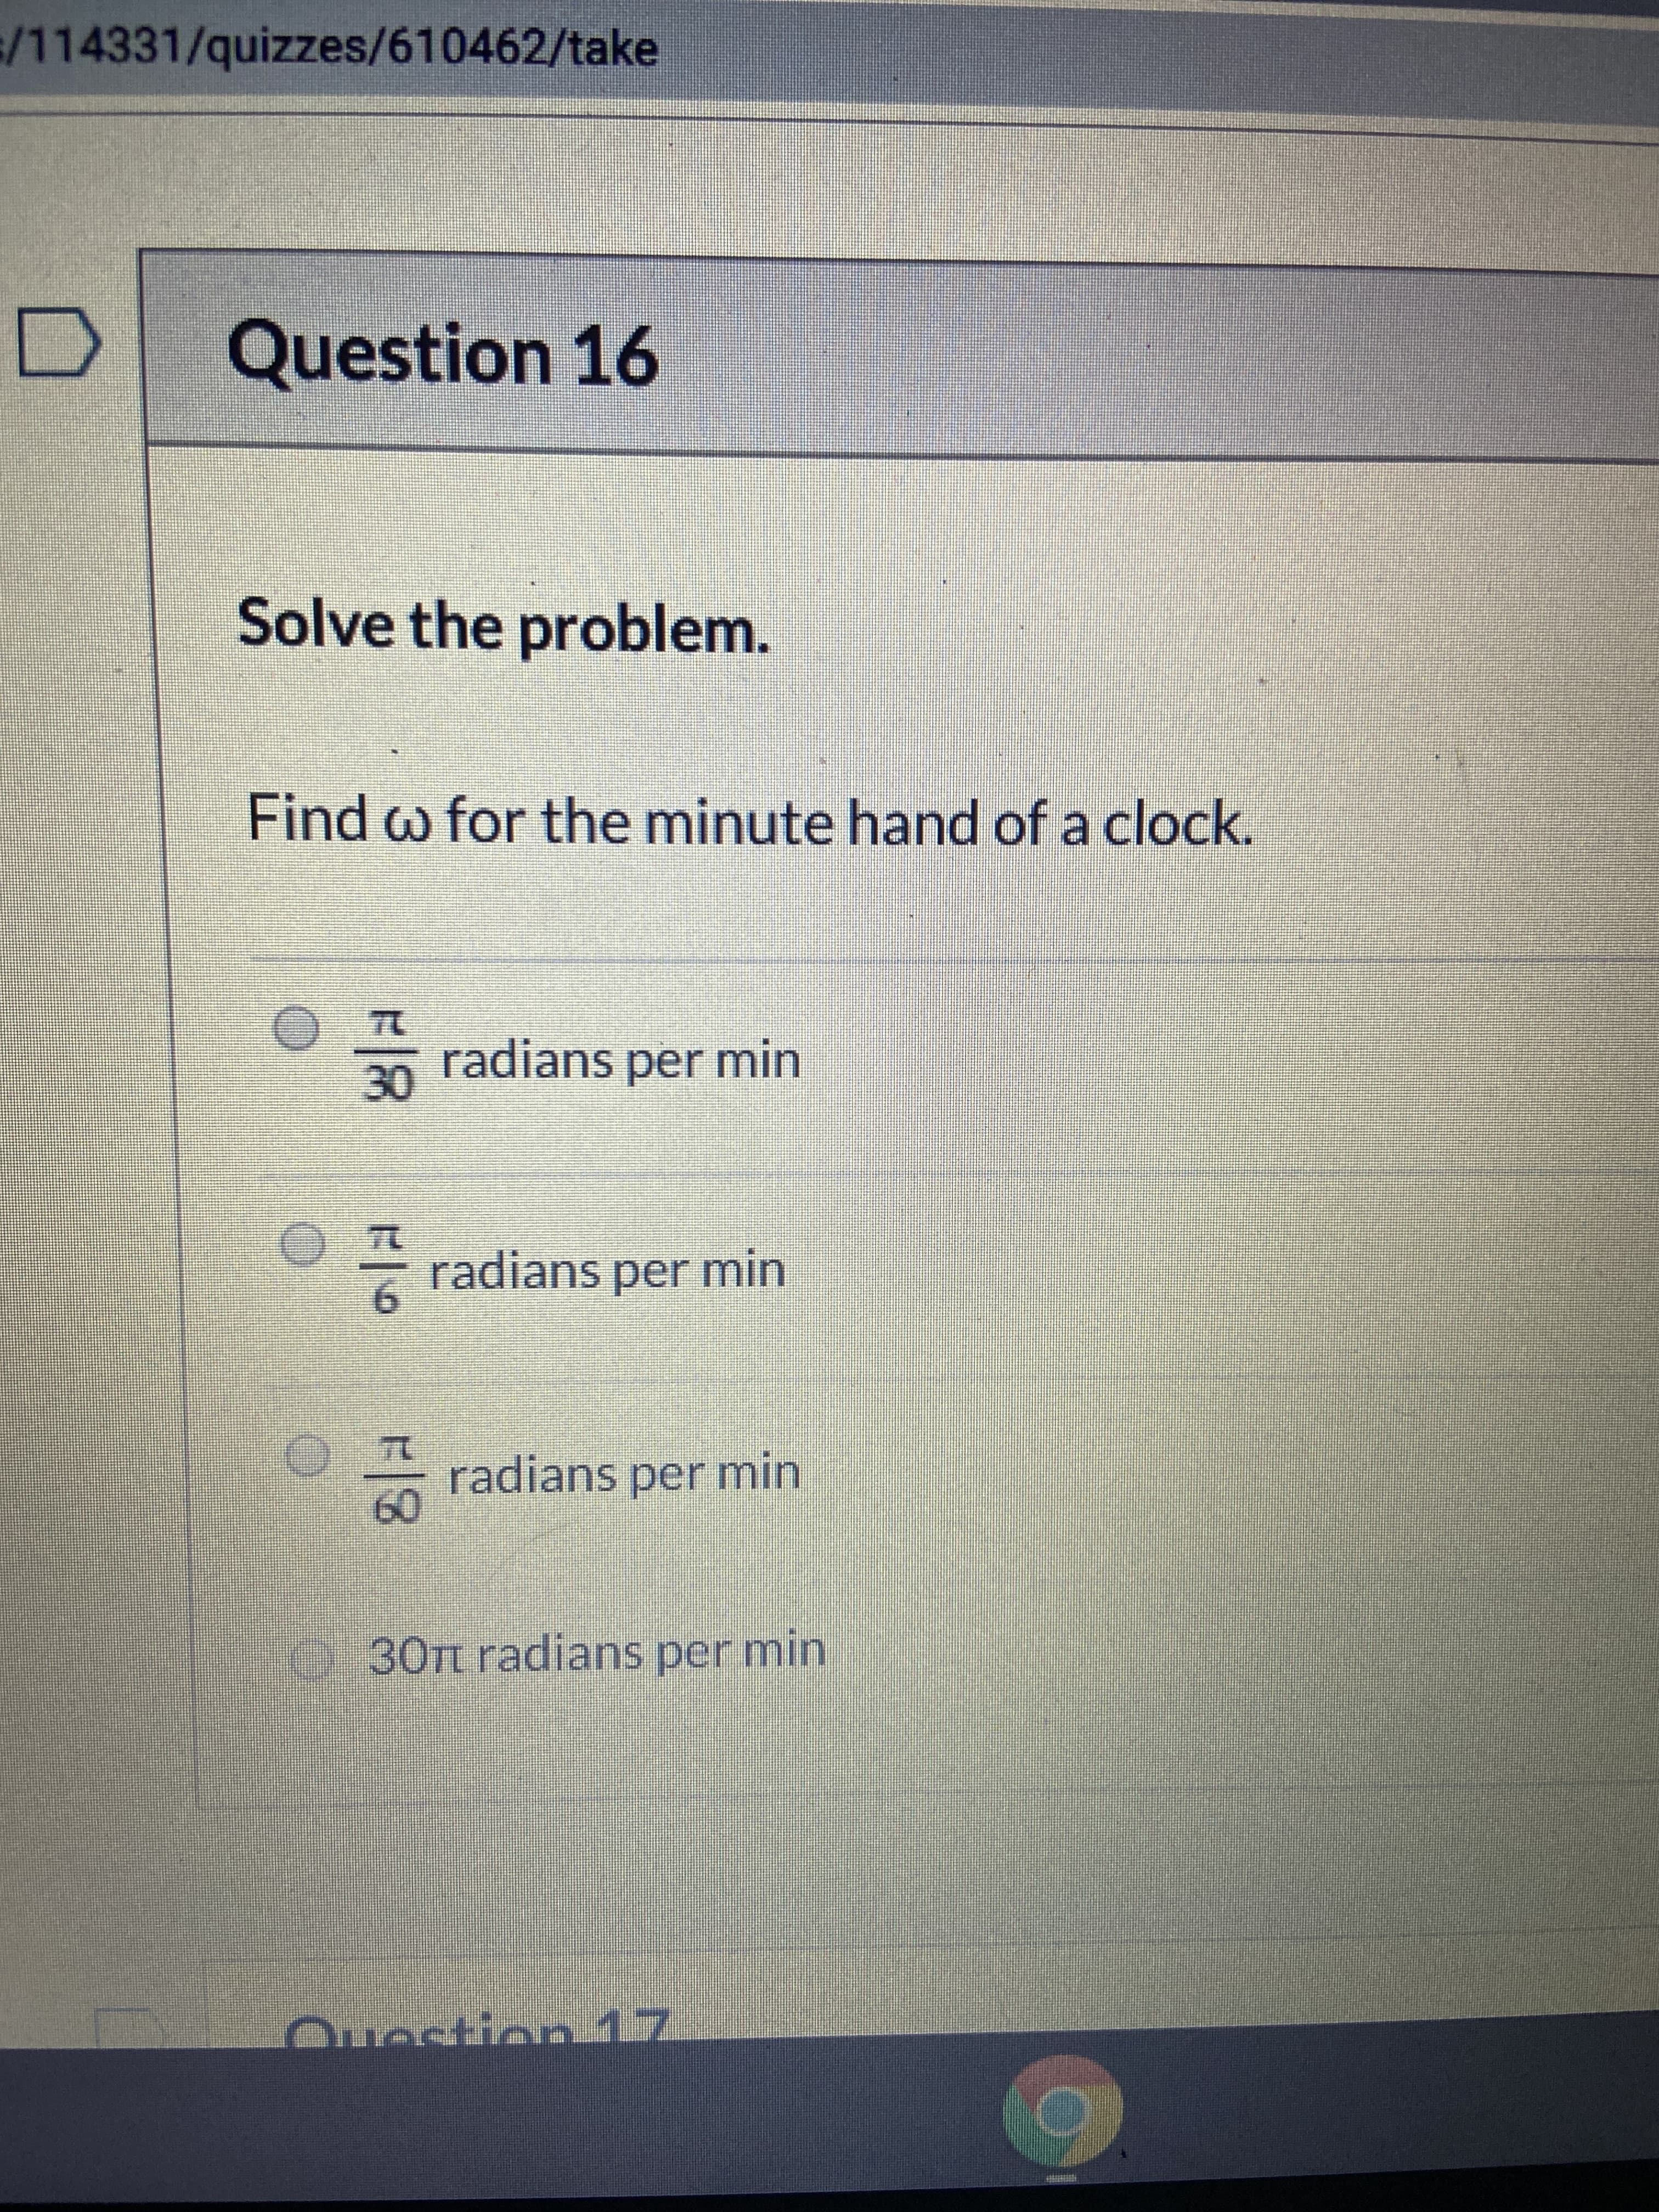 /114331/quizzes/610462/take
Question 16
Solve the problem.
Find w for the minute hand of a clock.
30
radians per min
radians per min
9.
radians per min
60
30TL radians per min
Question 17
R/8
